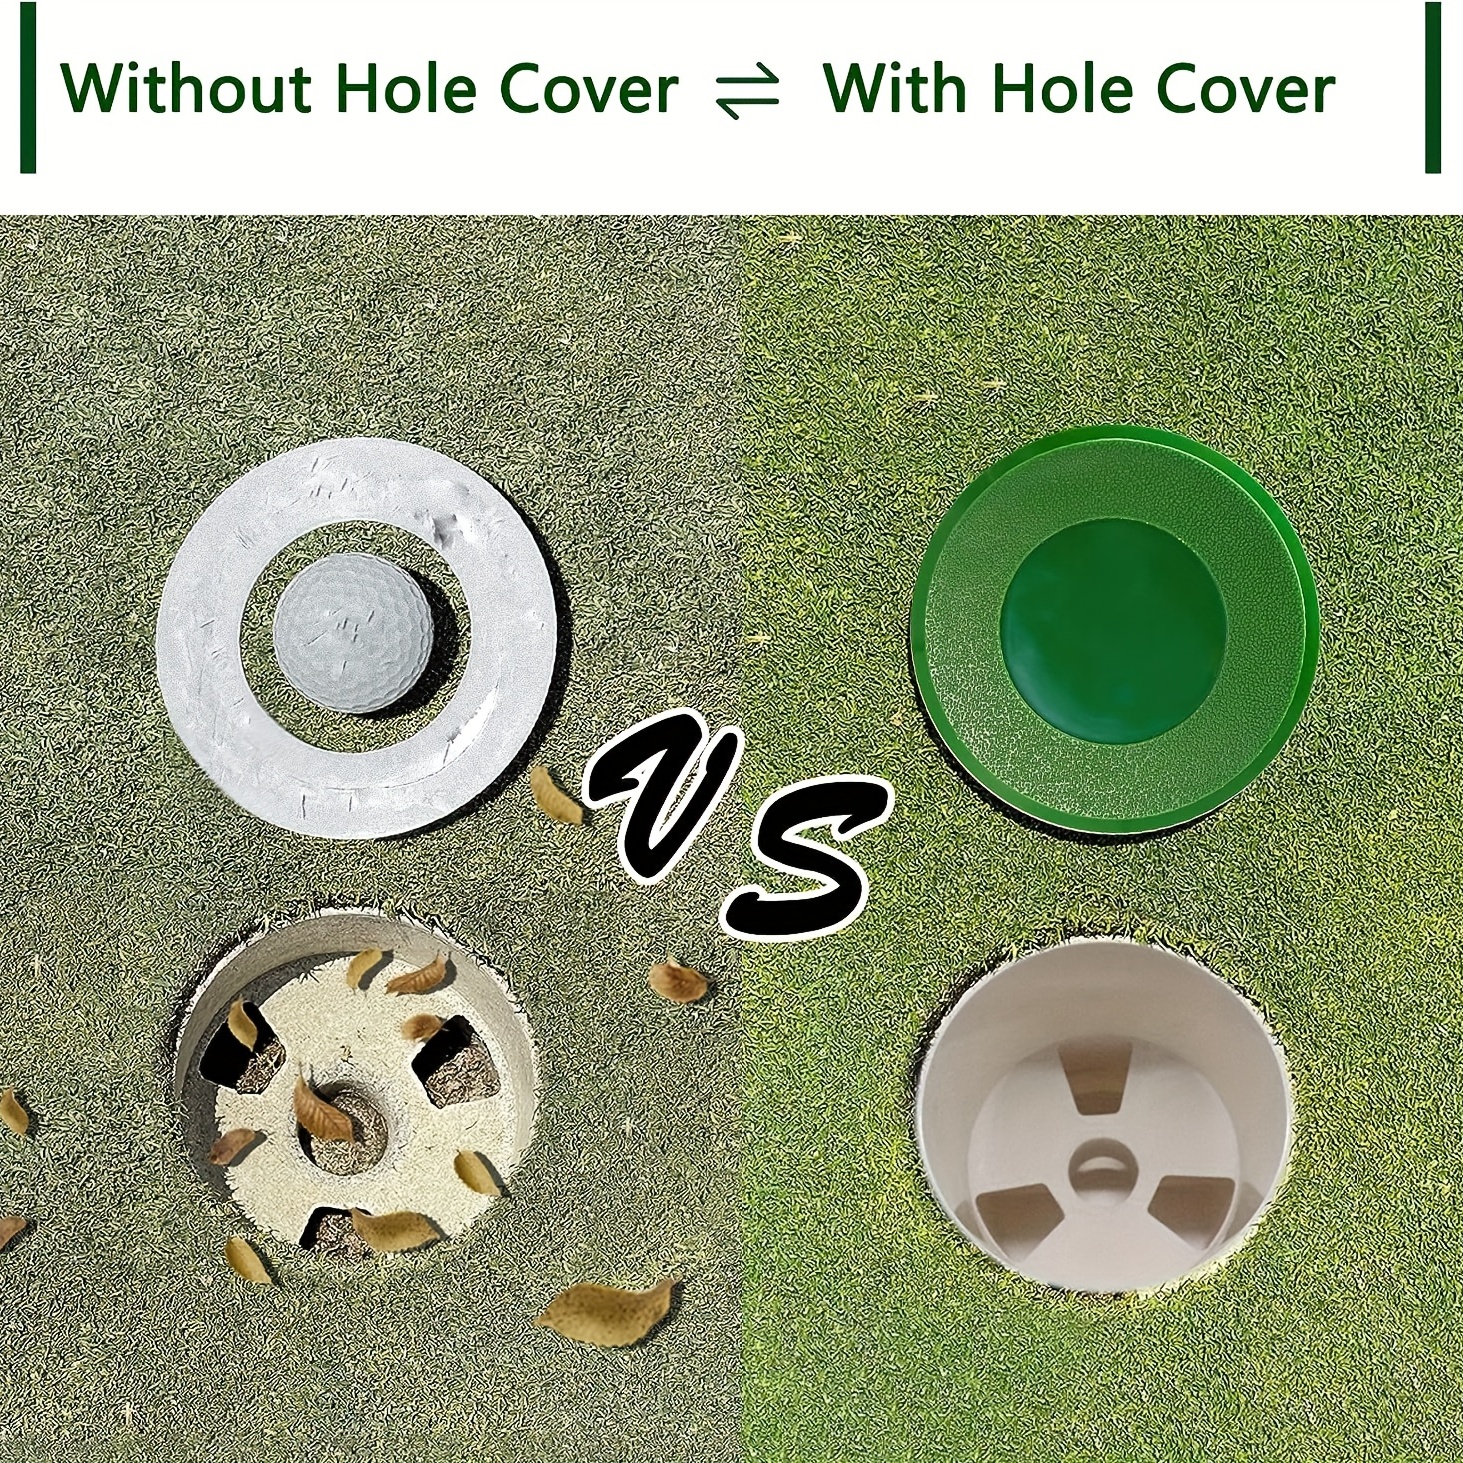 4pcs Golf Cup Cover Golf Hole Putting Green Cup Golf Practice Training Aids  Green Hole Cup for Outdoor Activities